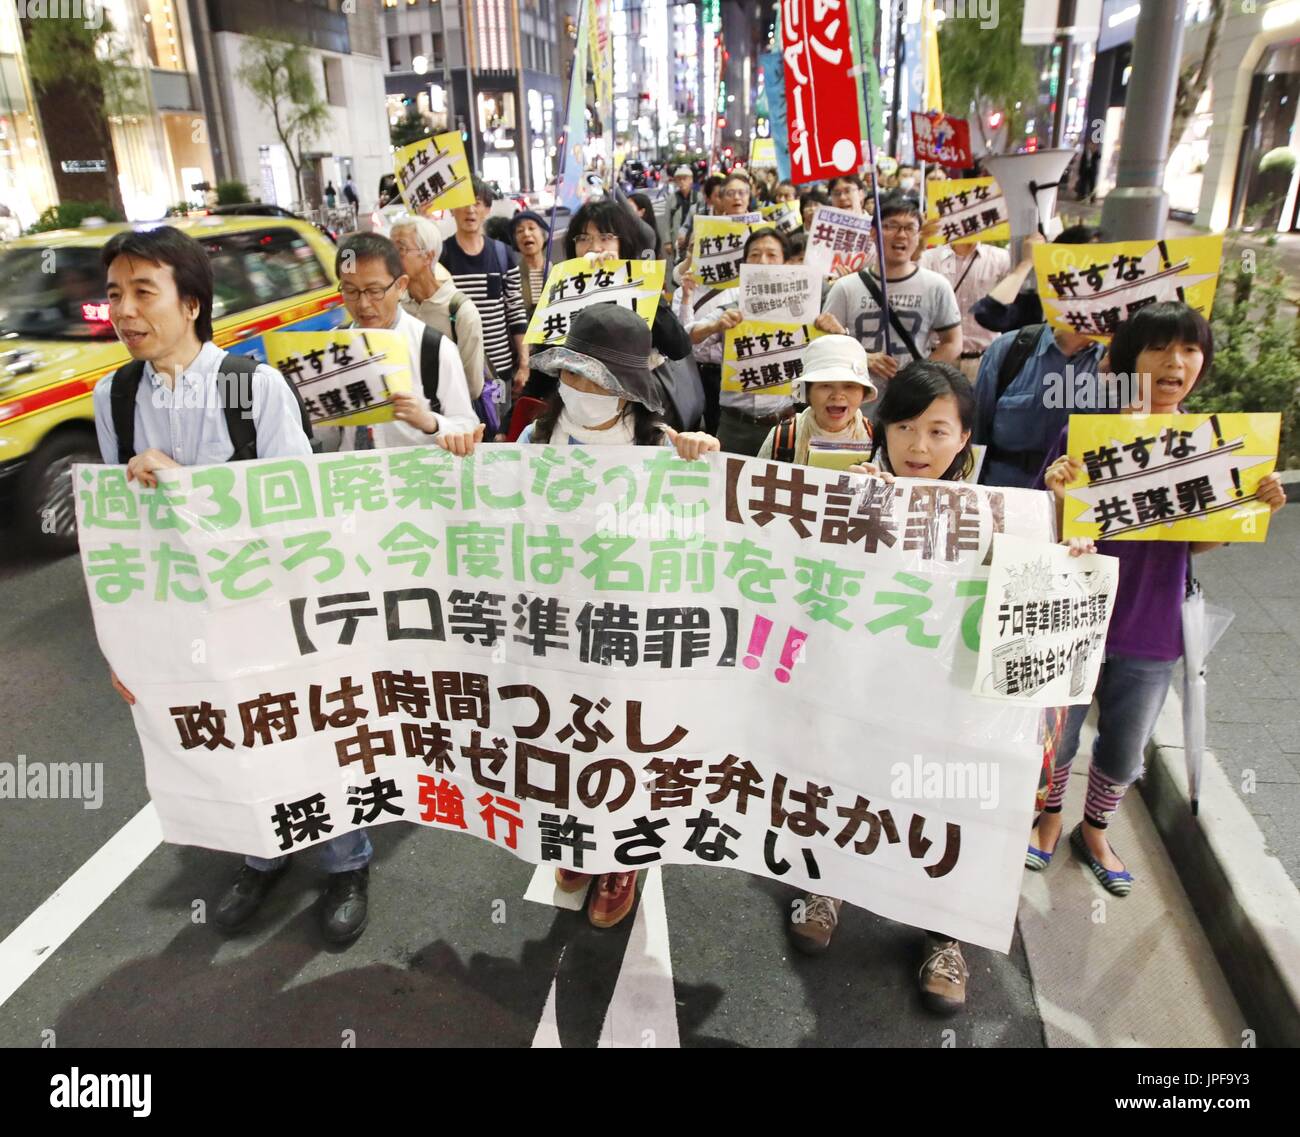 Protesters march in Tokyo's Ginza shopping district on May 24, 2017, against a controversial bill to penalize the planning of serious crimes amid worries that the bill could lead to excessive state surveillance and abuses of civil rights. (Kyodo) ==Kyodo Stock Photo